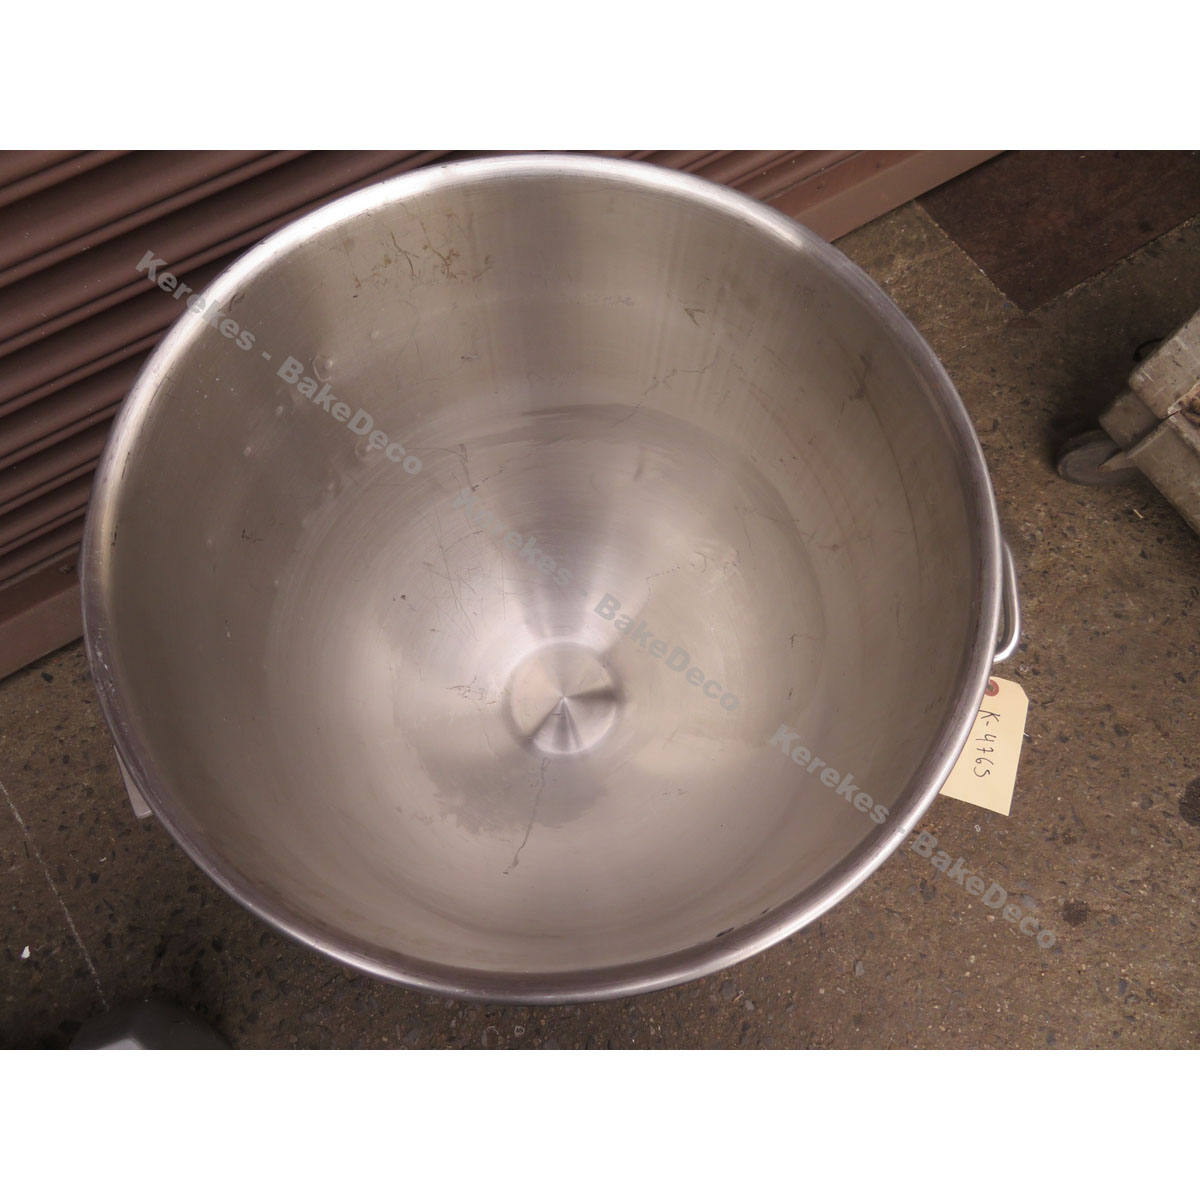 Hobart BOWL-HL140 140 Quart Stainless Steel Bowl for HL1400 Mixer, Used Great Condition image 1